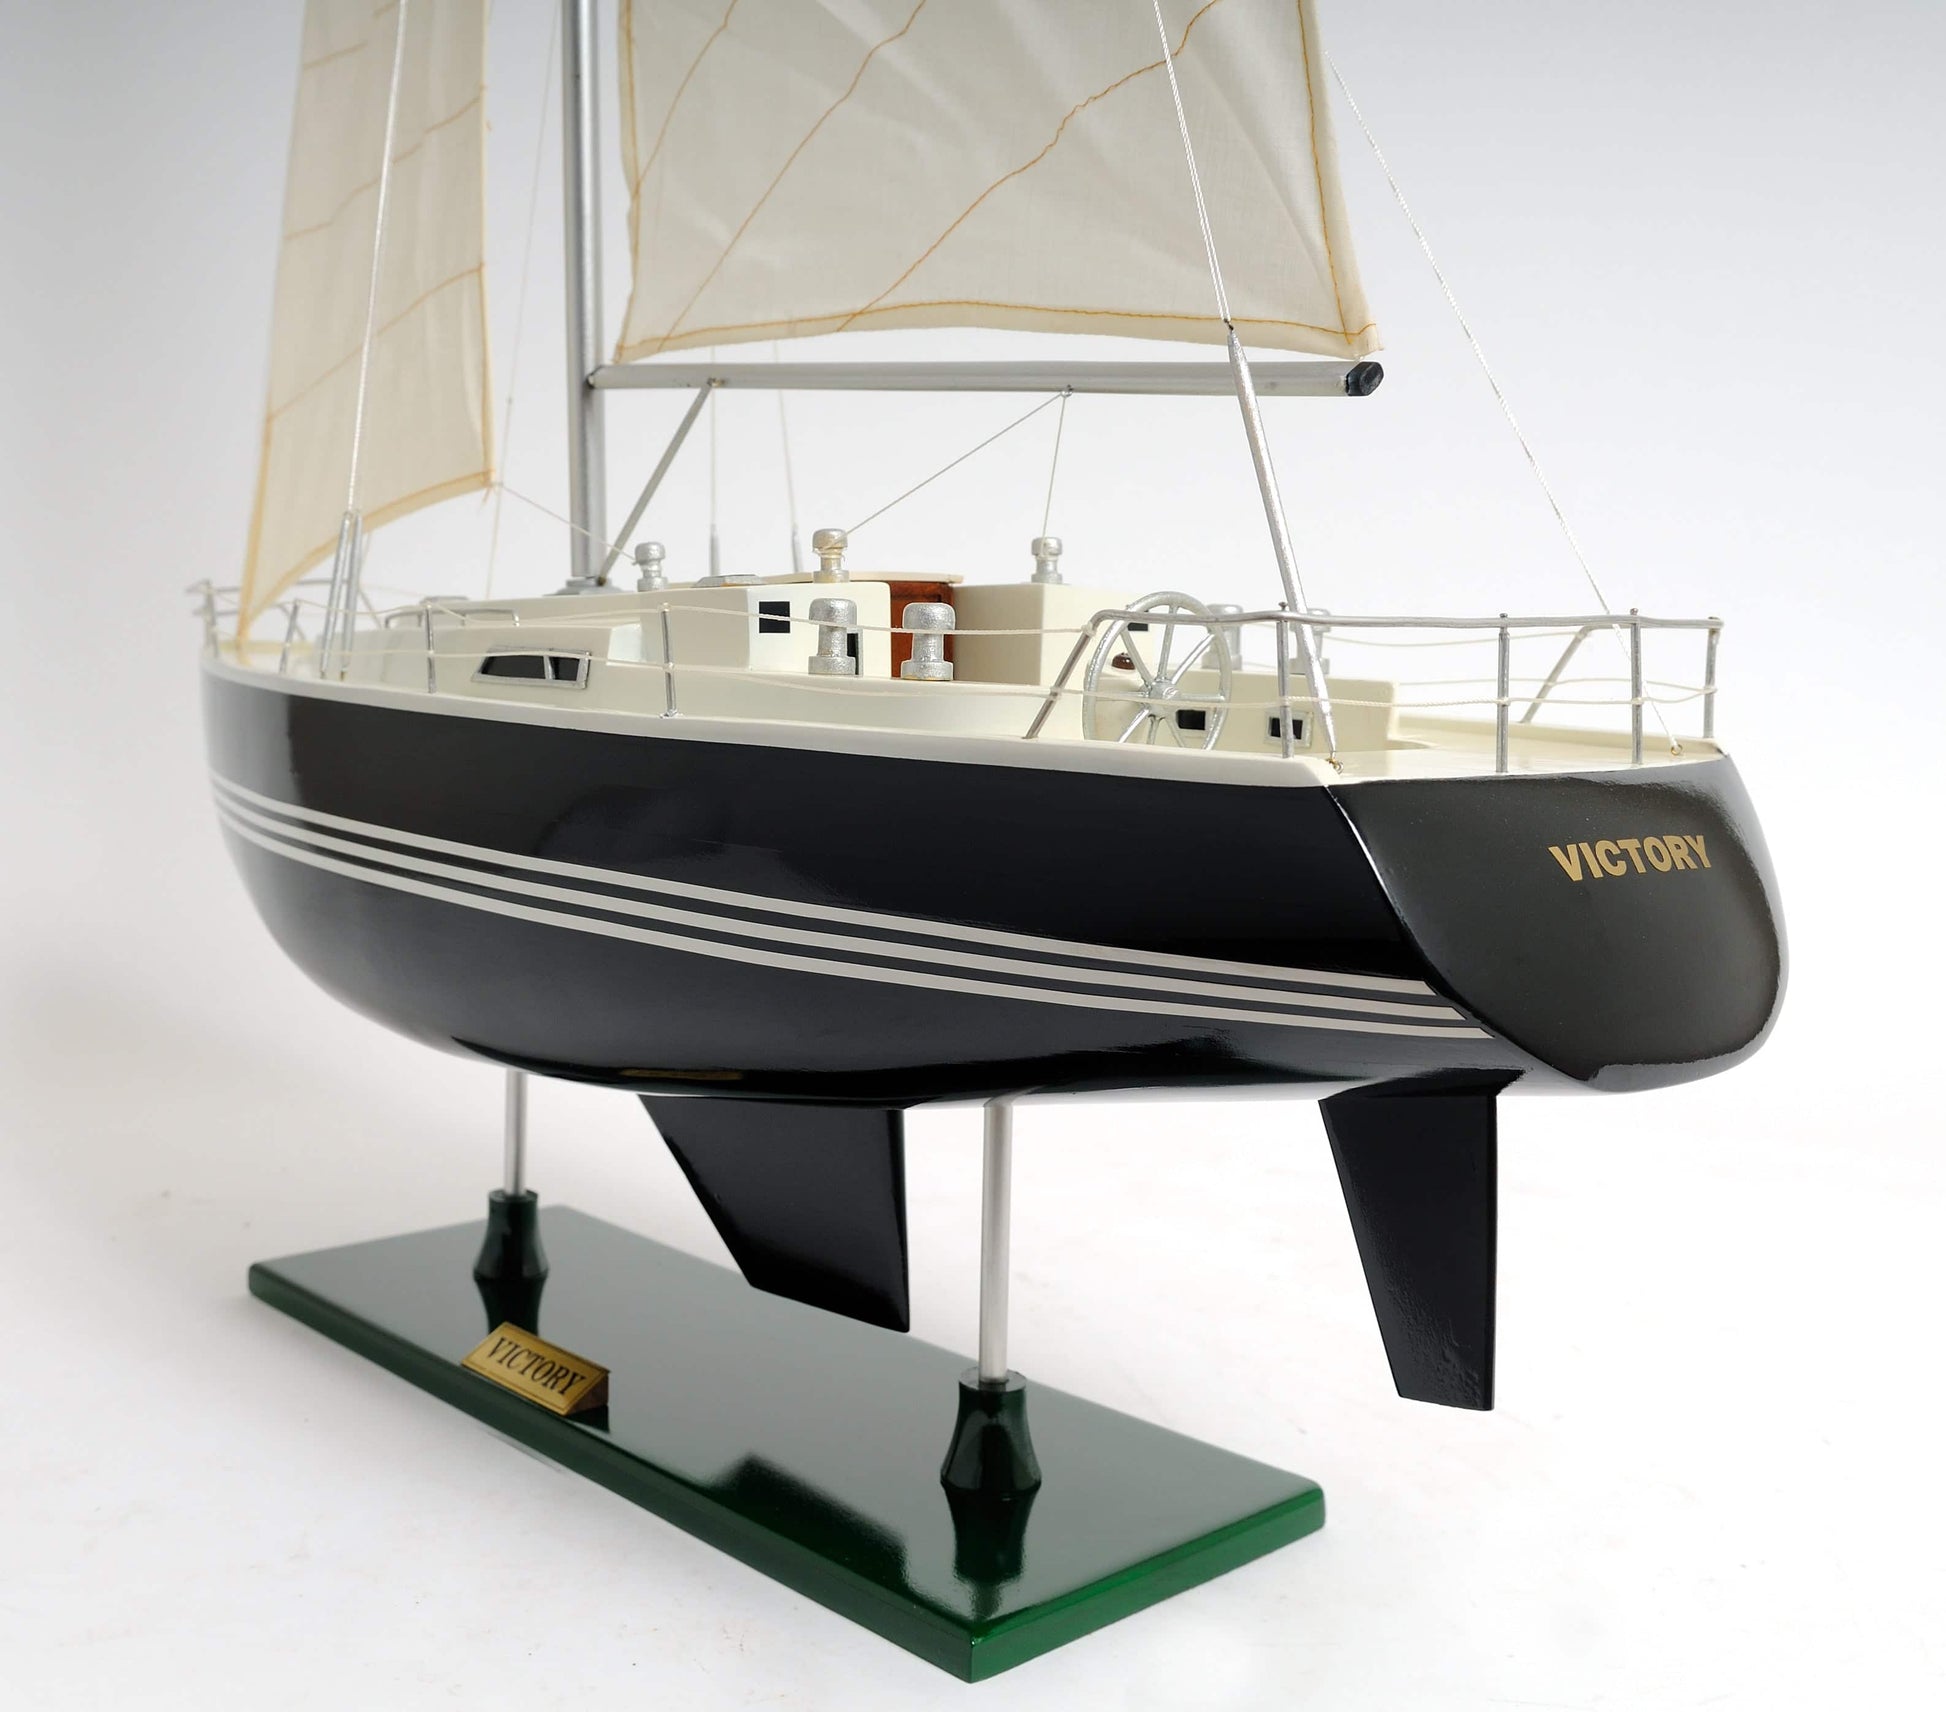 ALDO Hobbies & Creative Arts> Collectibles> Scale Model L: 29 W: 9.5 H: 47 Inches / NEW / Wood Victory Sailing Yacht Medium Sailboat Wood Model